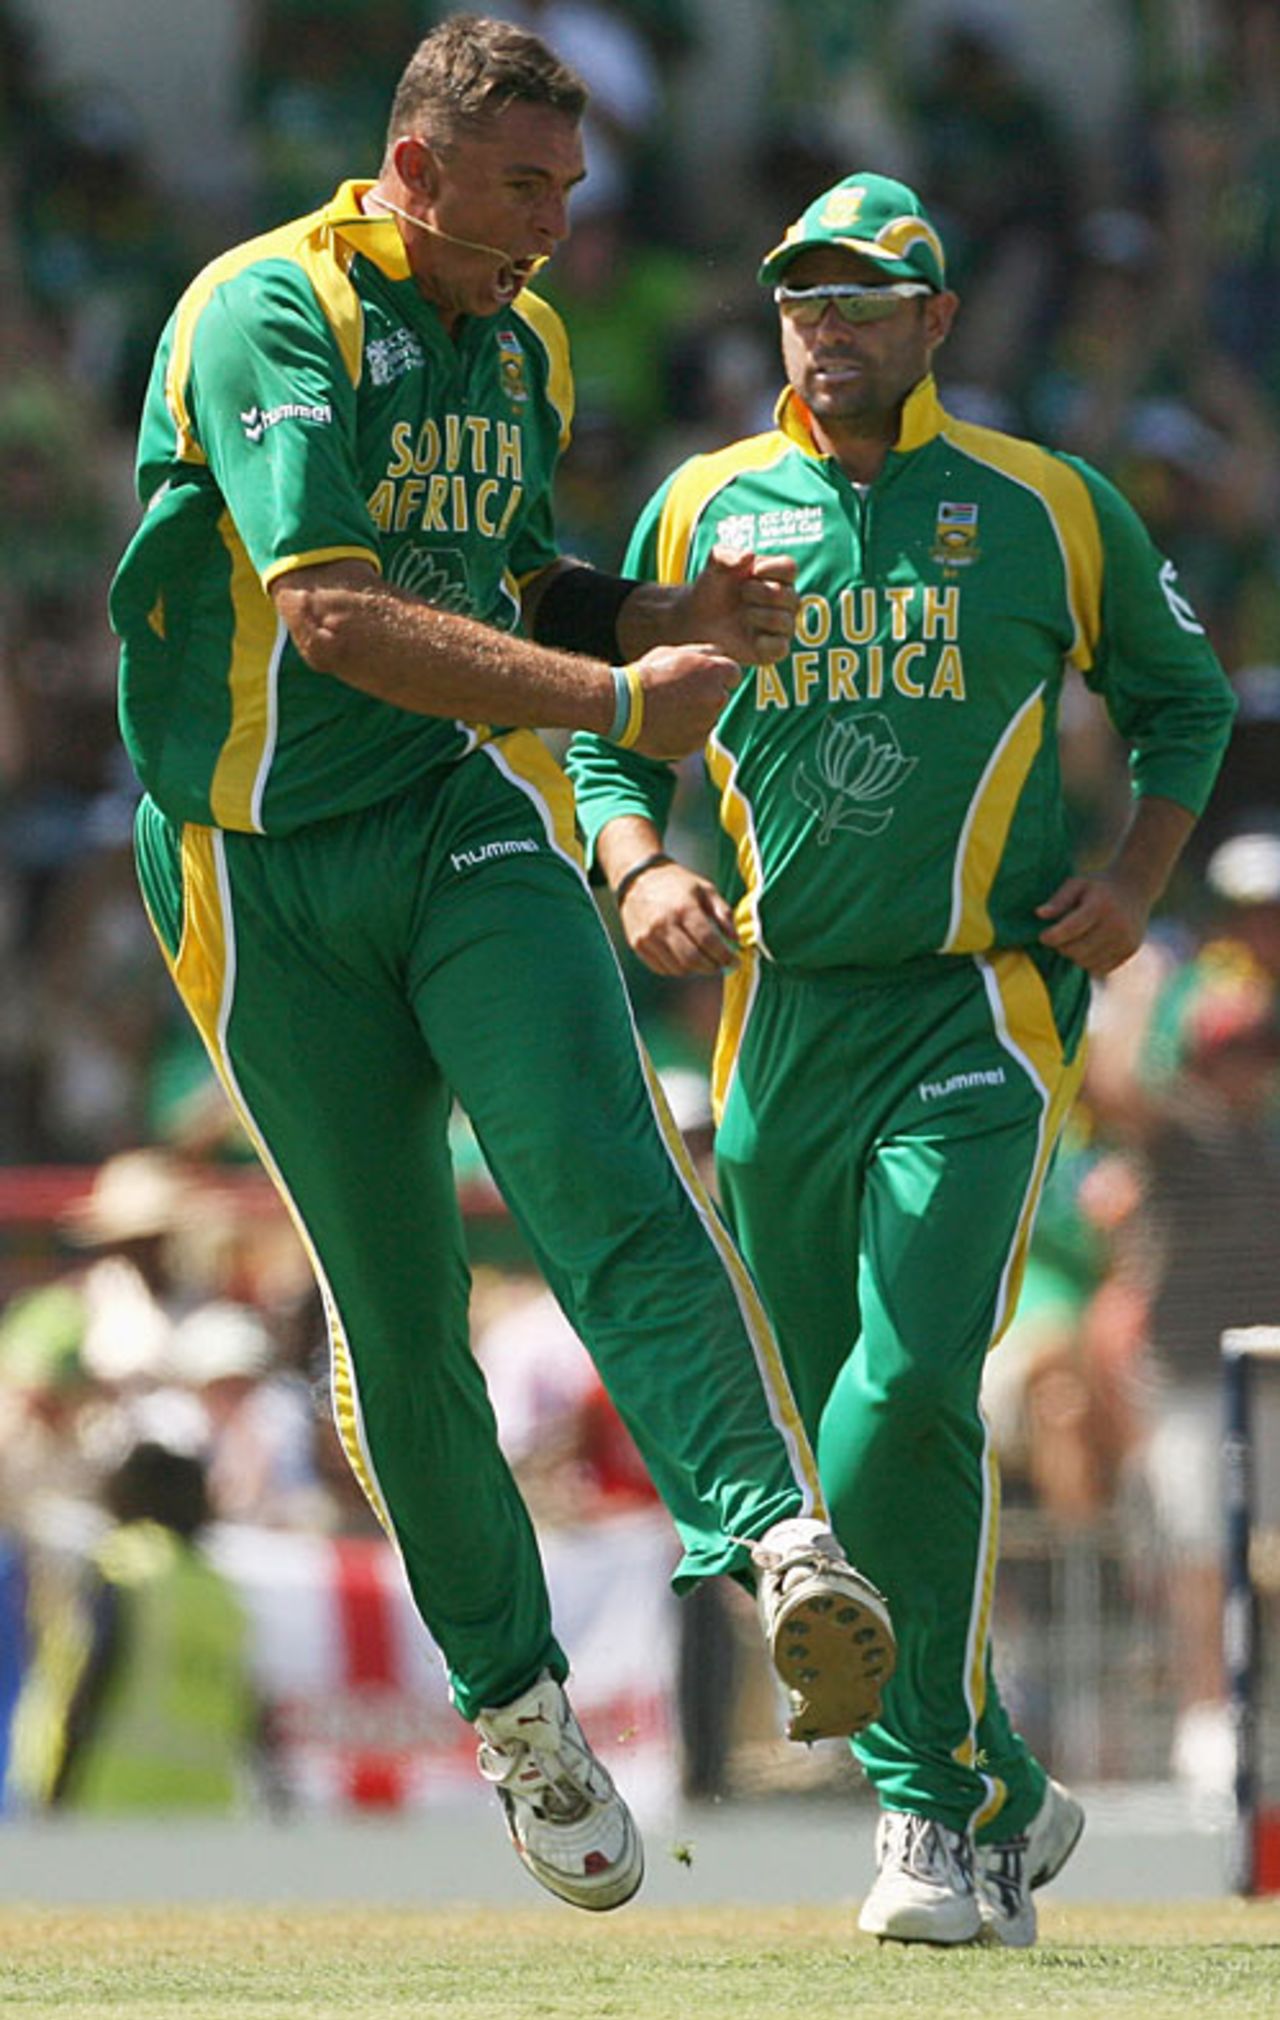 Andre Nel roars his delight in bowling Ricky Ponting, Australia v South Africa, 2nd semi-final, St Lucia, April 25, 2007